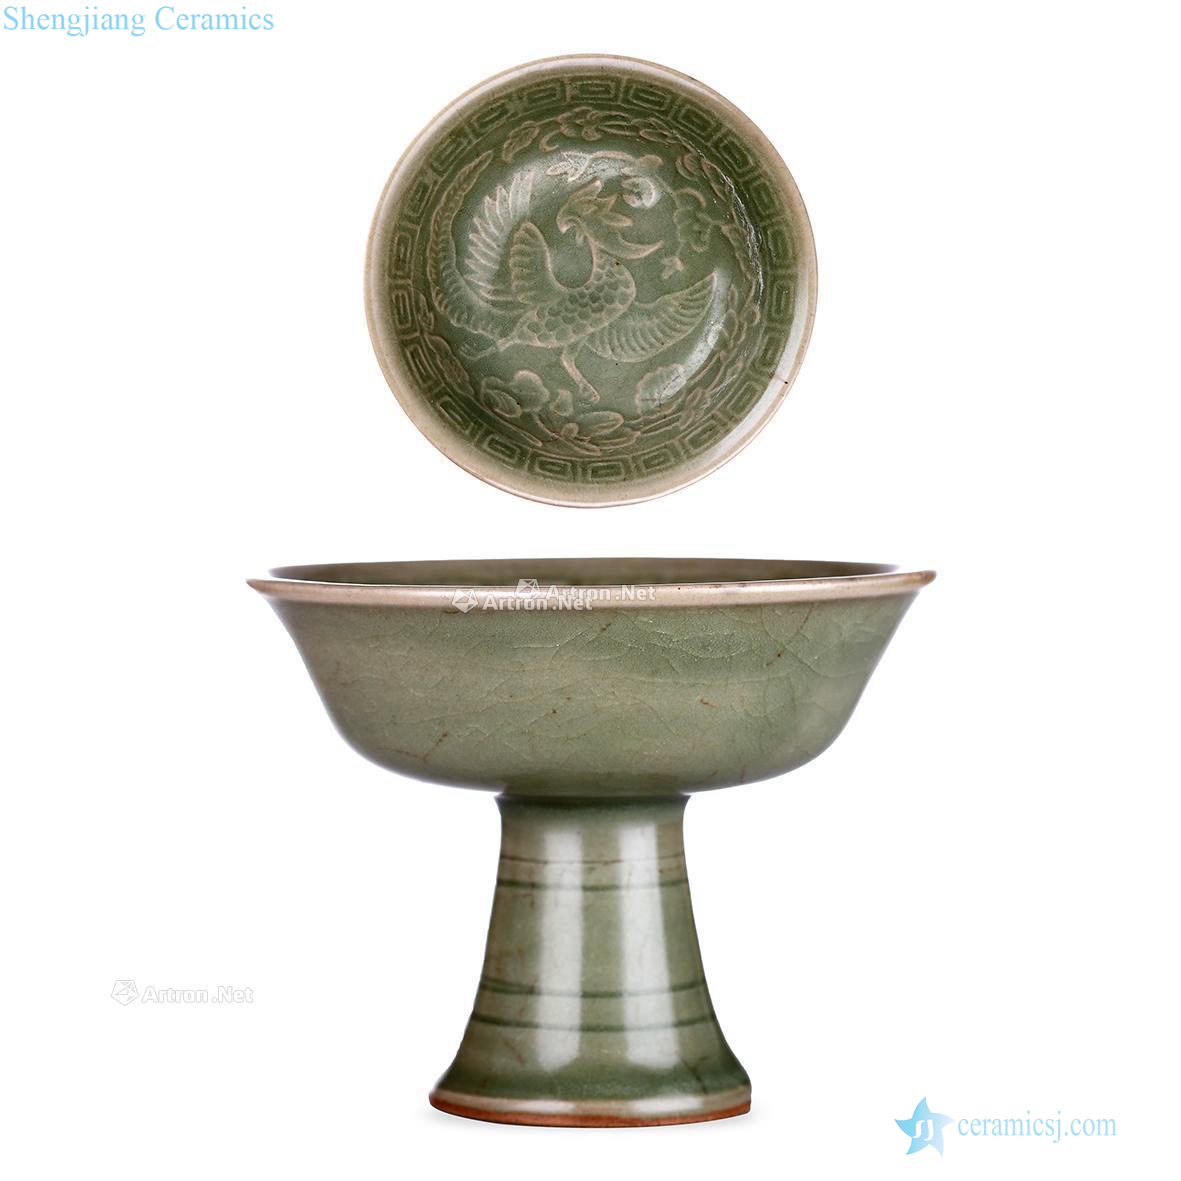 The song dynasty Longquan celadon chicken wear peony grains footed bowl